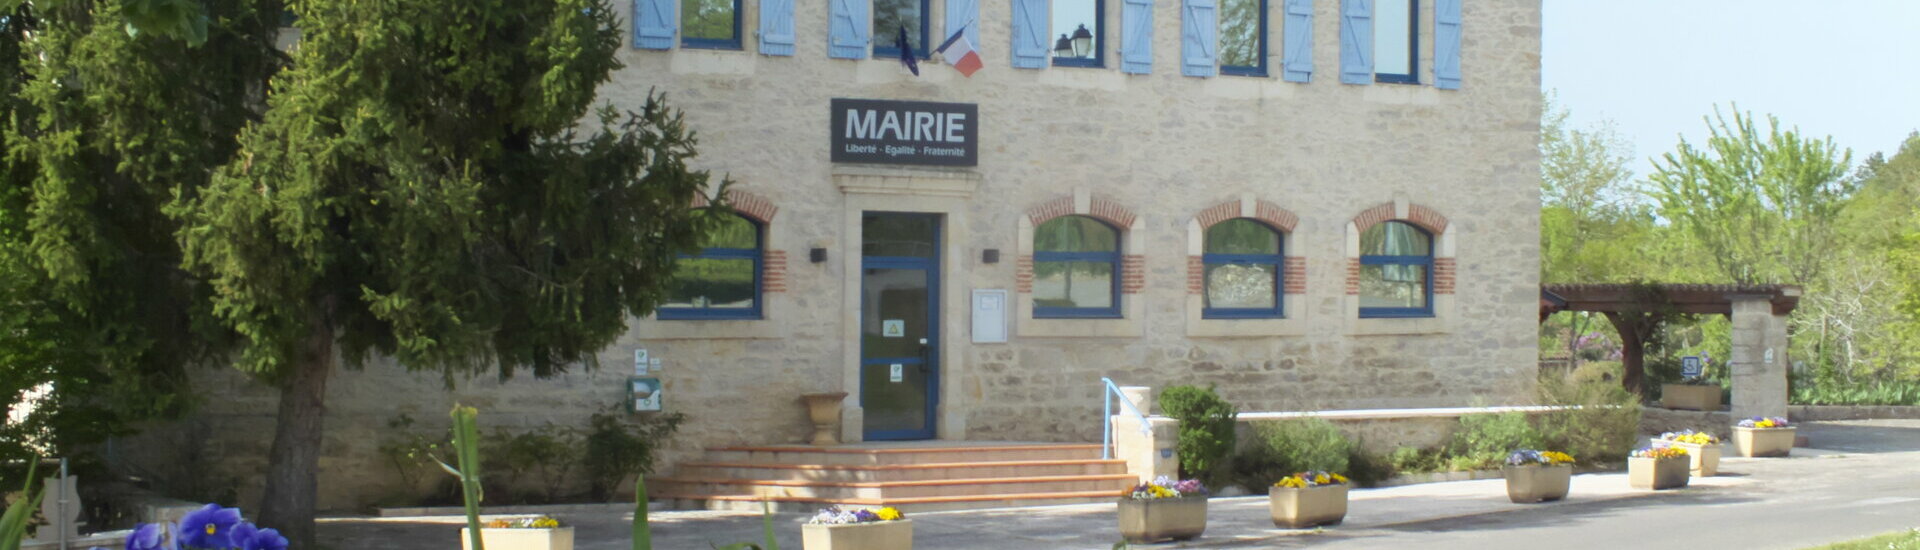 Personnel Communal Mairie Cahors Quercy Lot